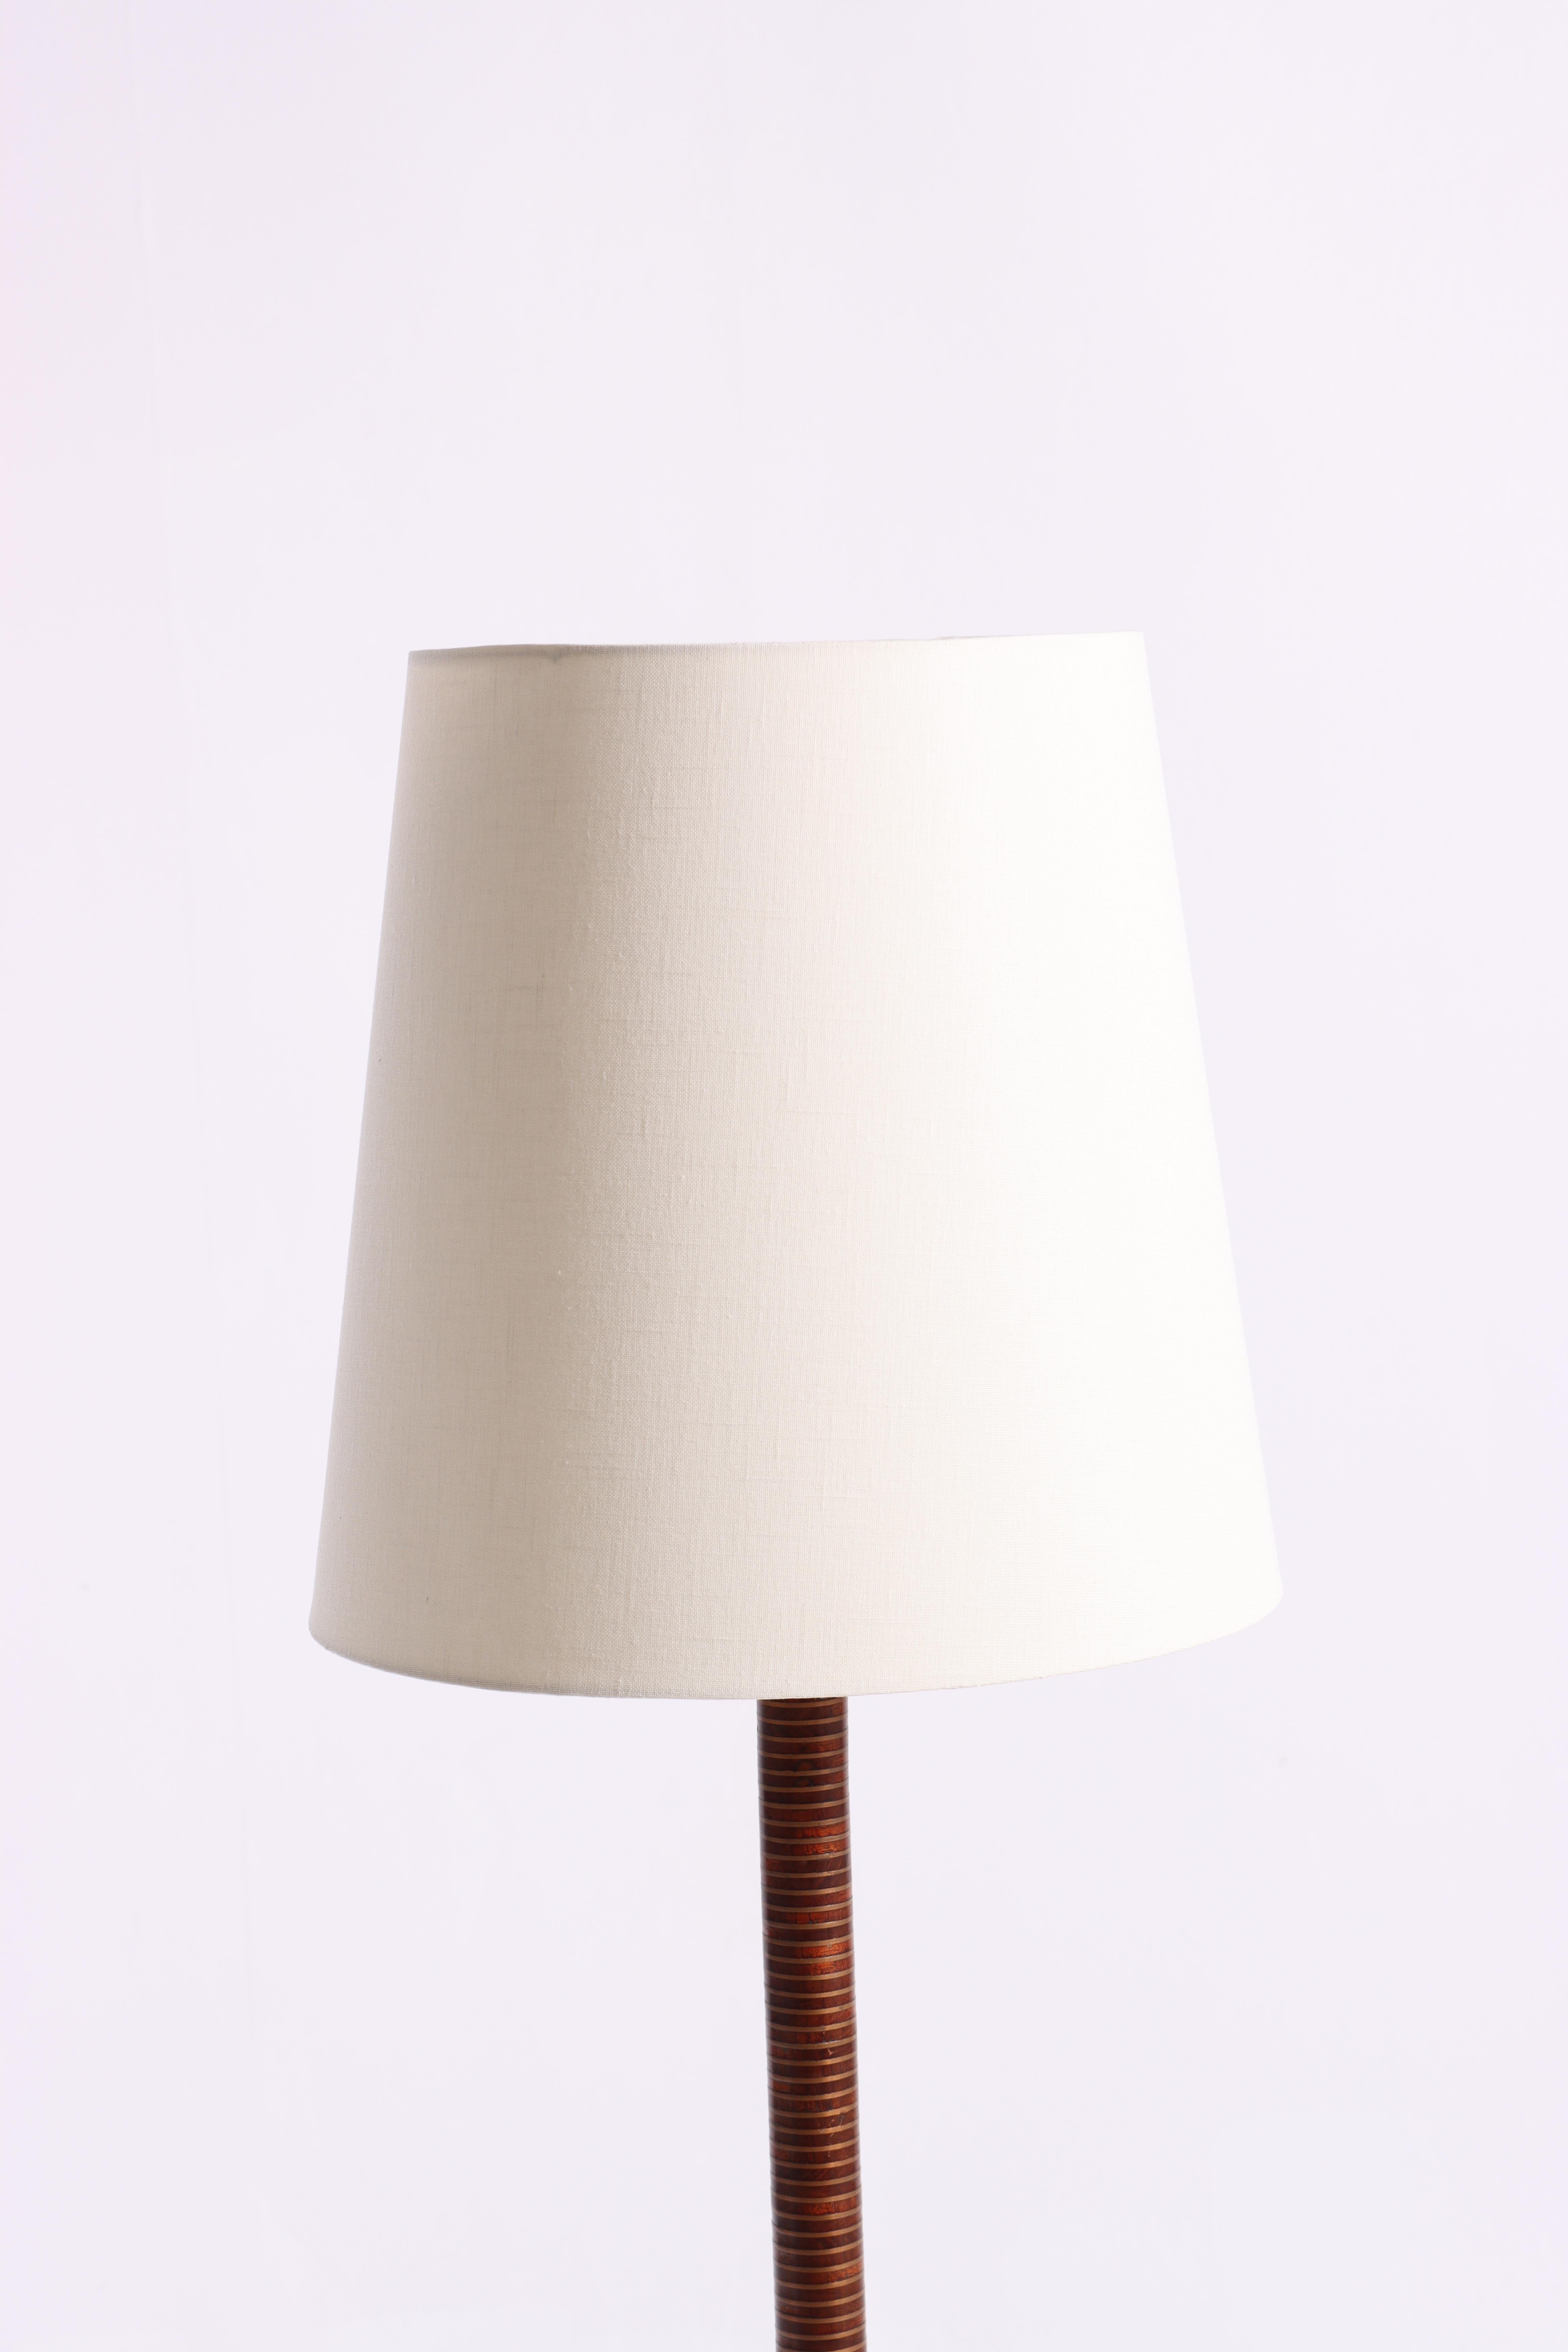 Rare floor lamp in teak and copper with new fabric shade. Designed and made in Denmark.